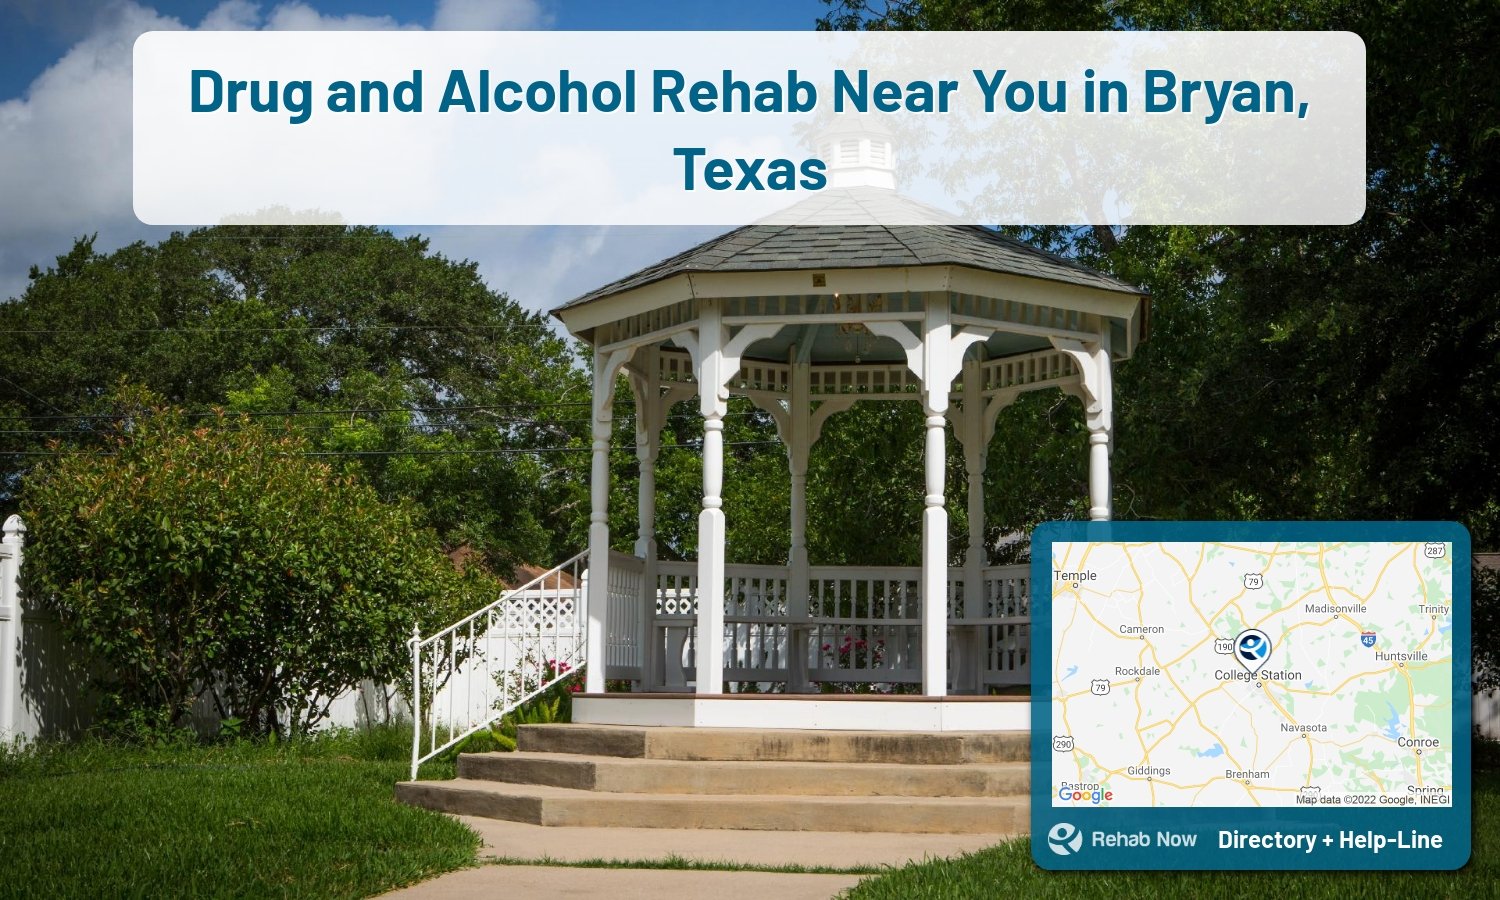 Bryan, TX Treatment Centers. Find drug rehab in Bryan, Texas, or detox and treatment programs. Get the right help now!